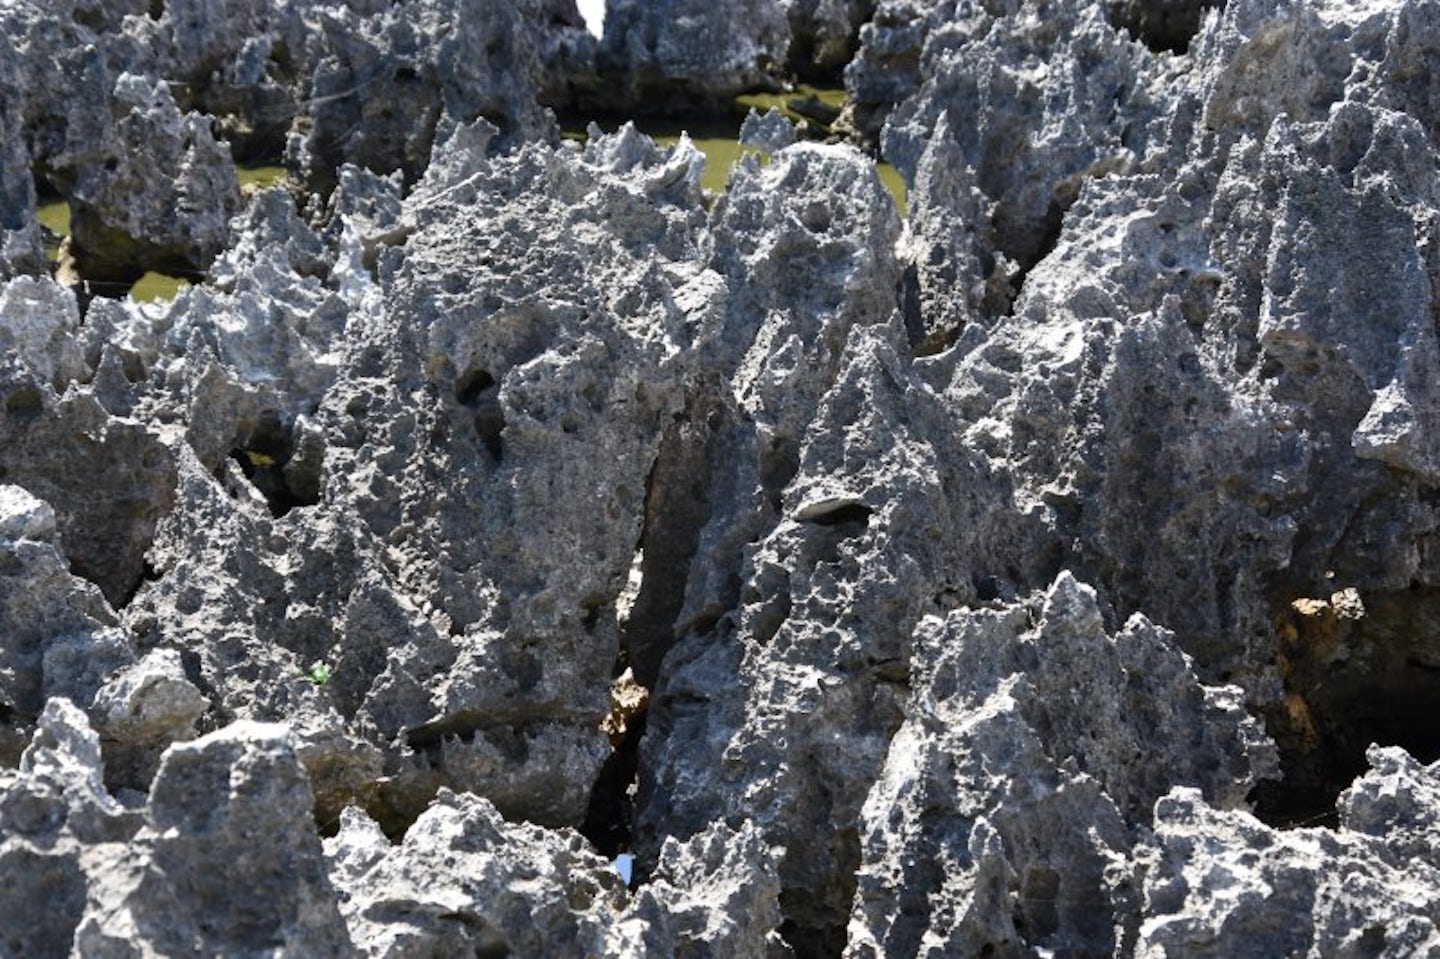 These are the gnarly rock formations that gave Hell at Grand Cayman its nam